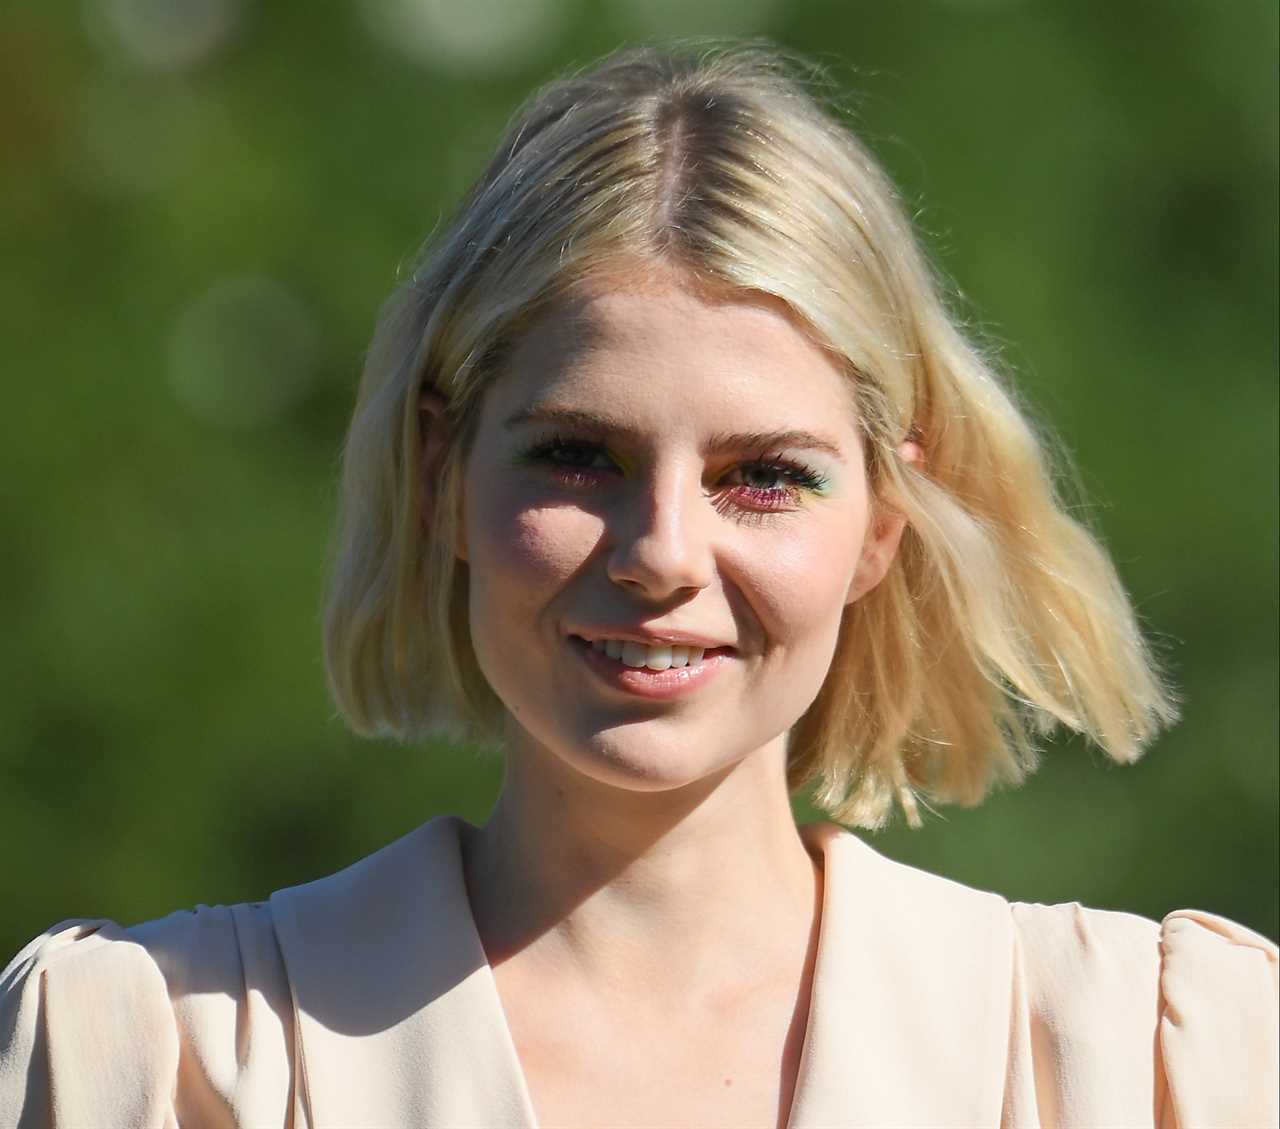 VENICE, ITALY - SEPTEMBER 03: Lucy Boynton is seen arriving at the 76th Venice Film Festival on September 03, 2019 in Venice, Italy. (Photo by Pascal Le Segretain/GC Images,)